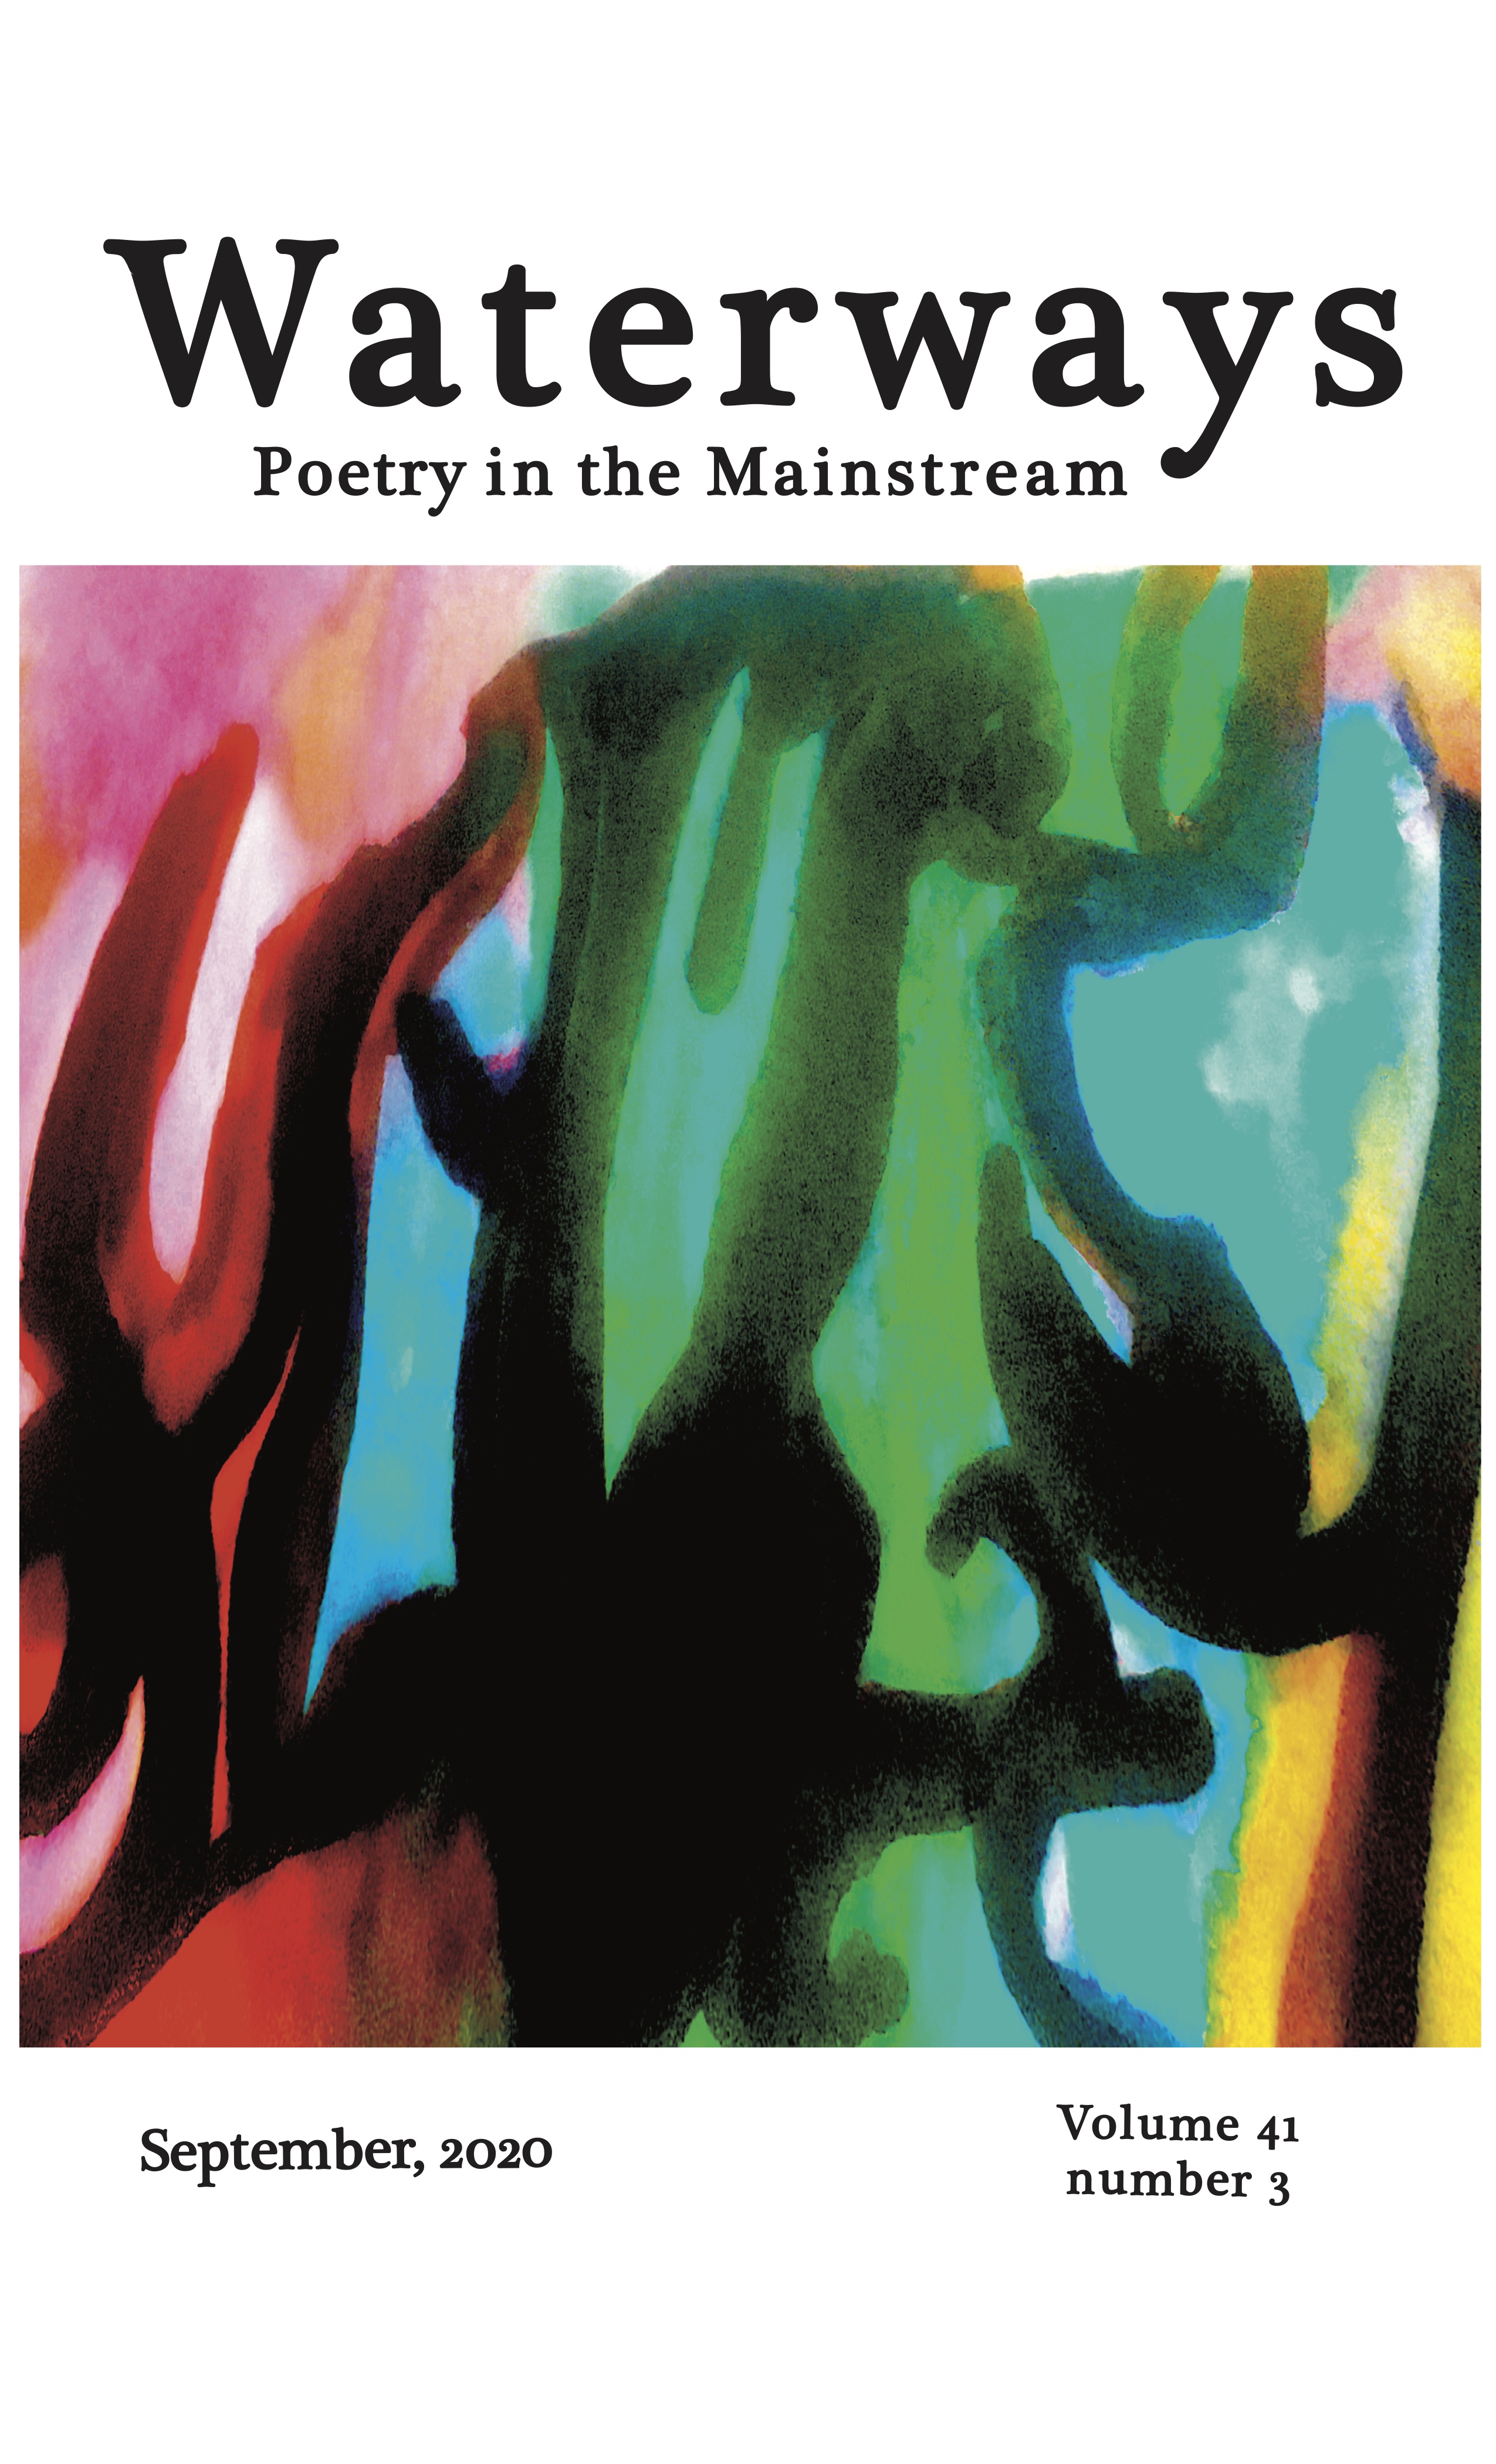 Cover of September 2019 is Richard Spiegel's abstract watercolor and ink improvisation in black, green, and red.